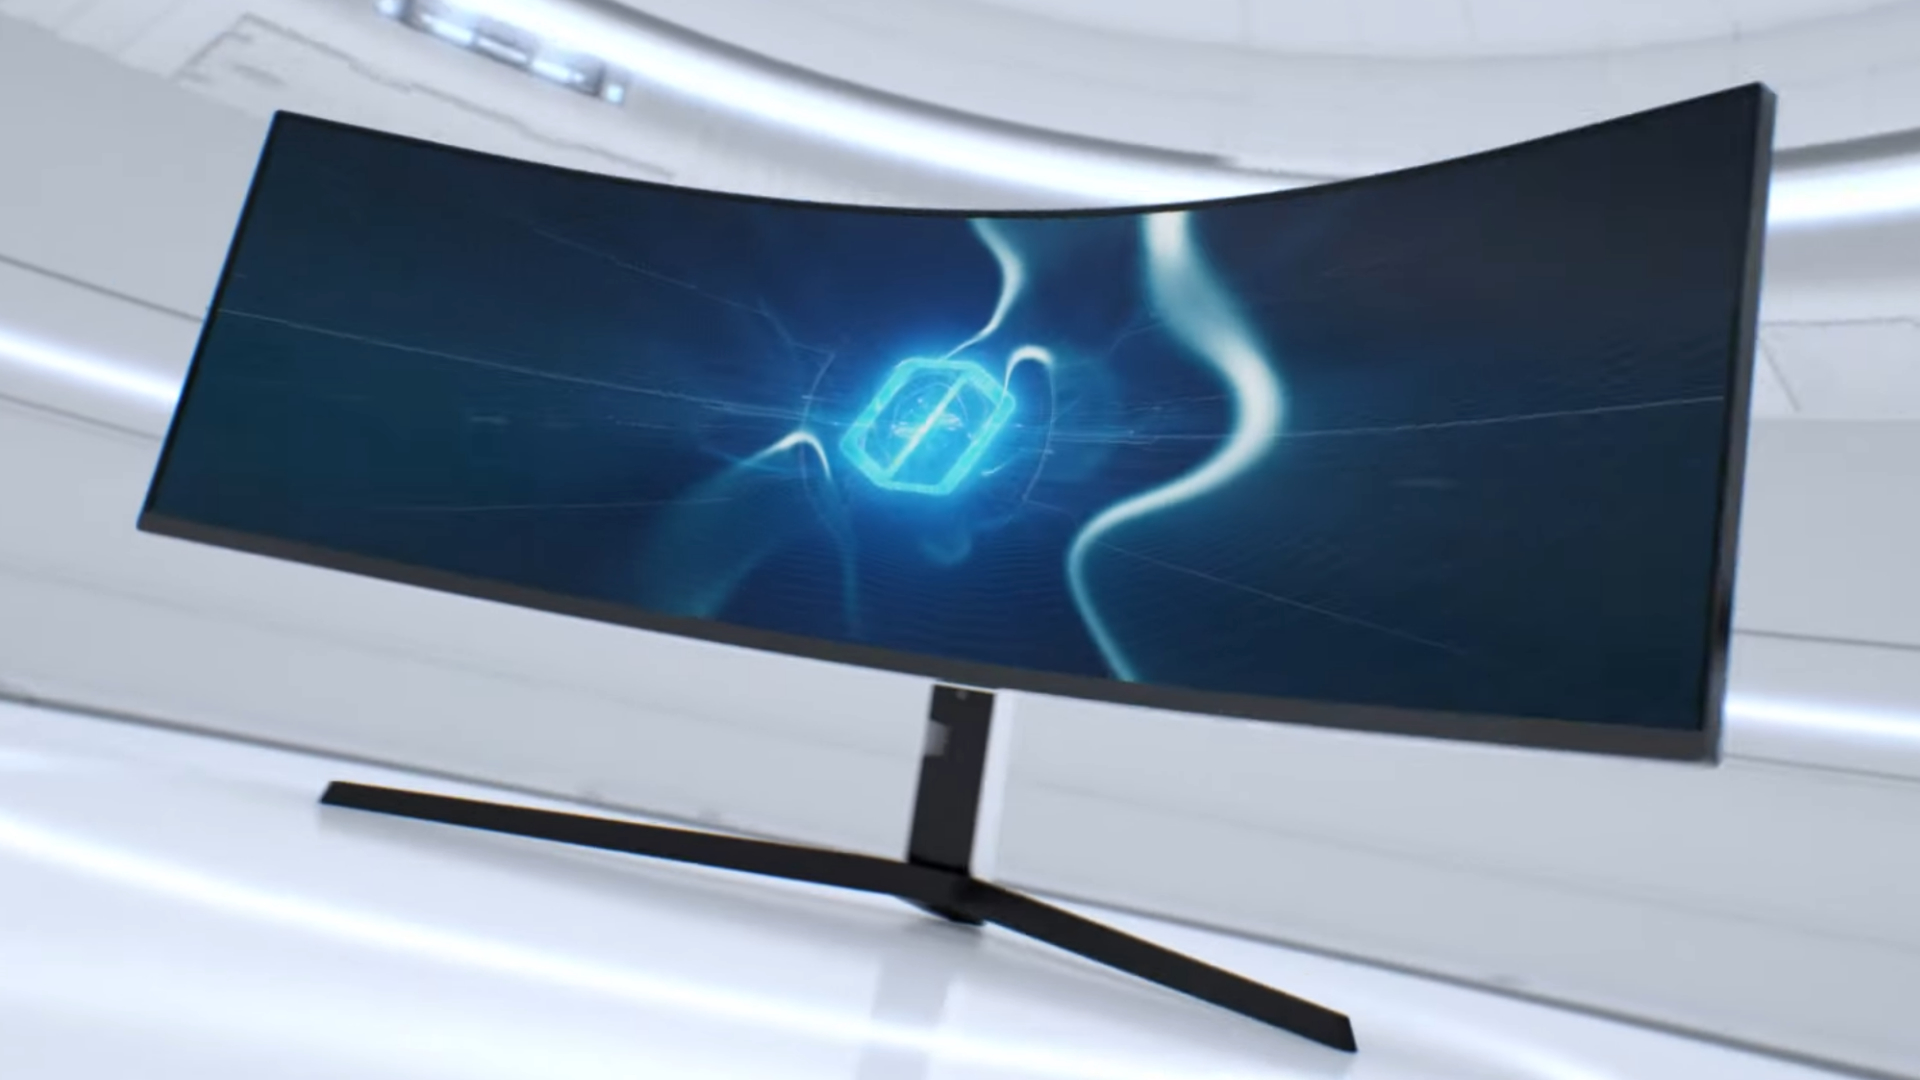  Samsung promises big things with the first DisplayPort 2.1 8K ultrawide monitor 